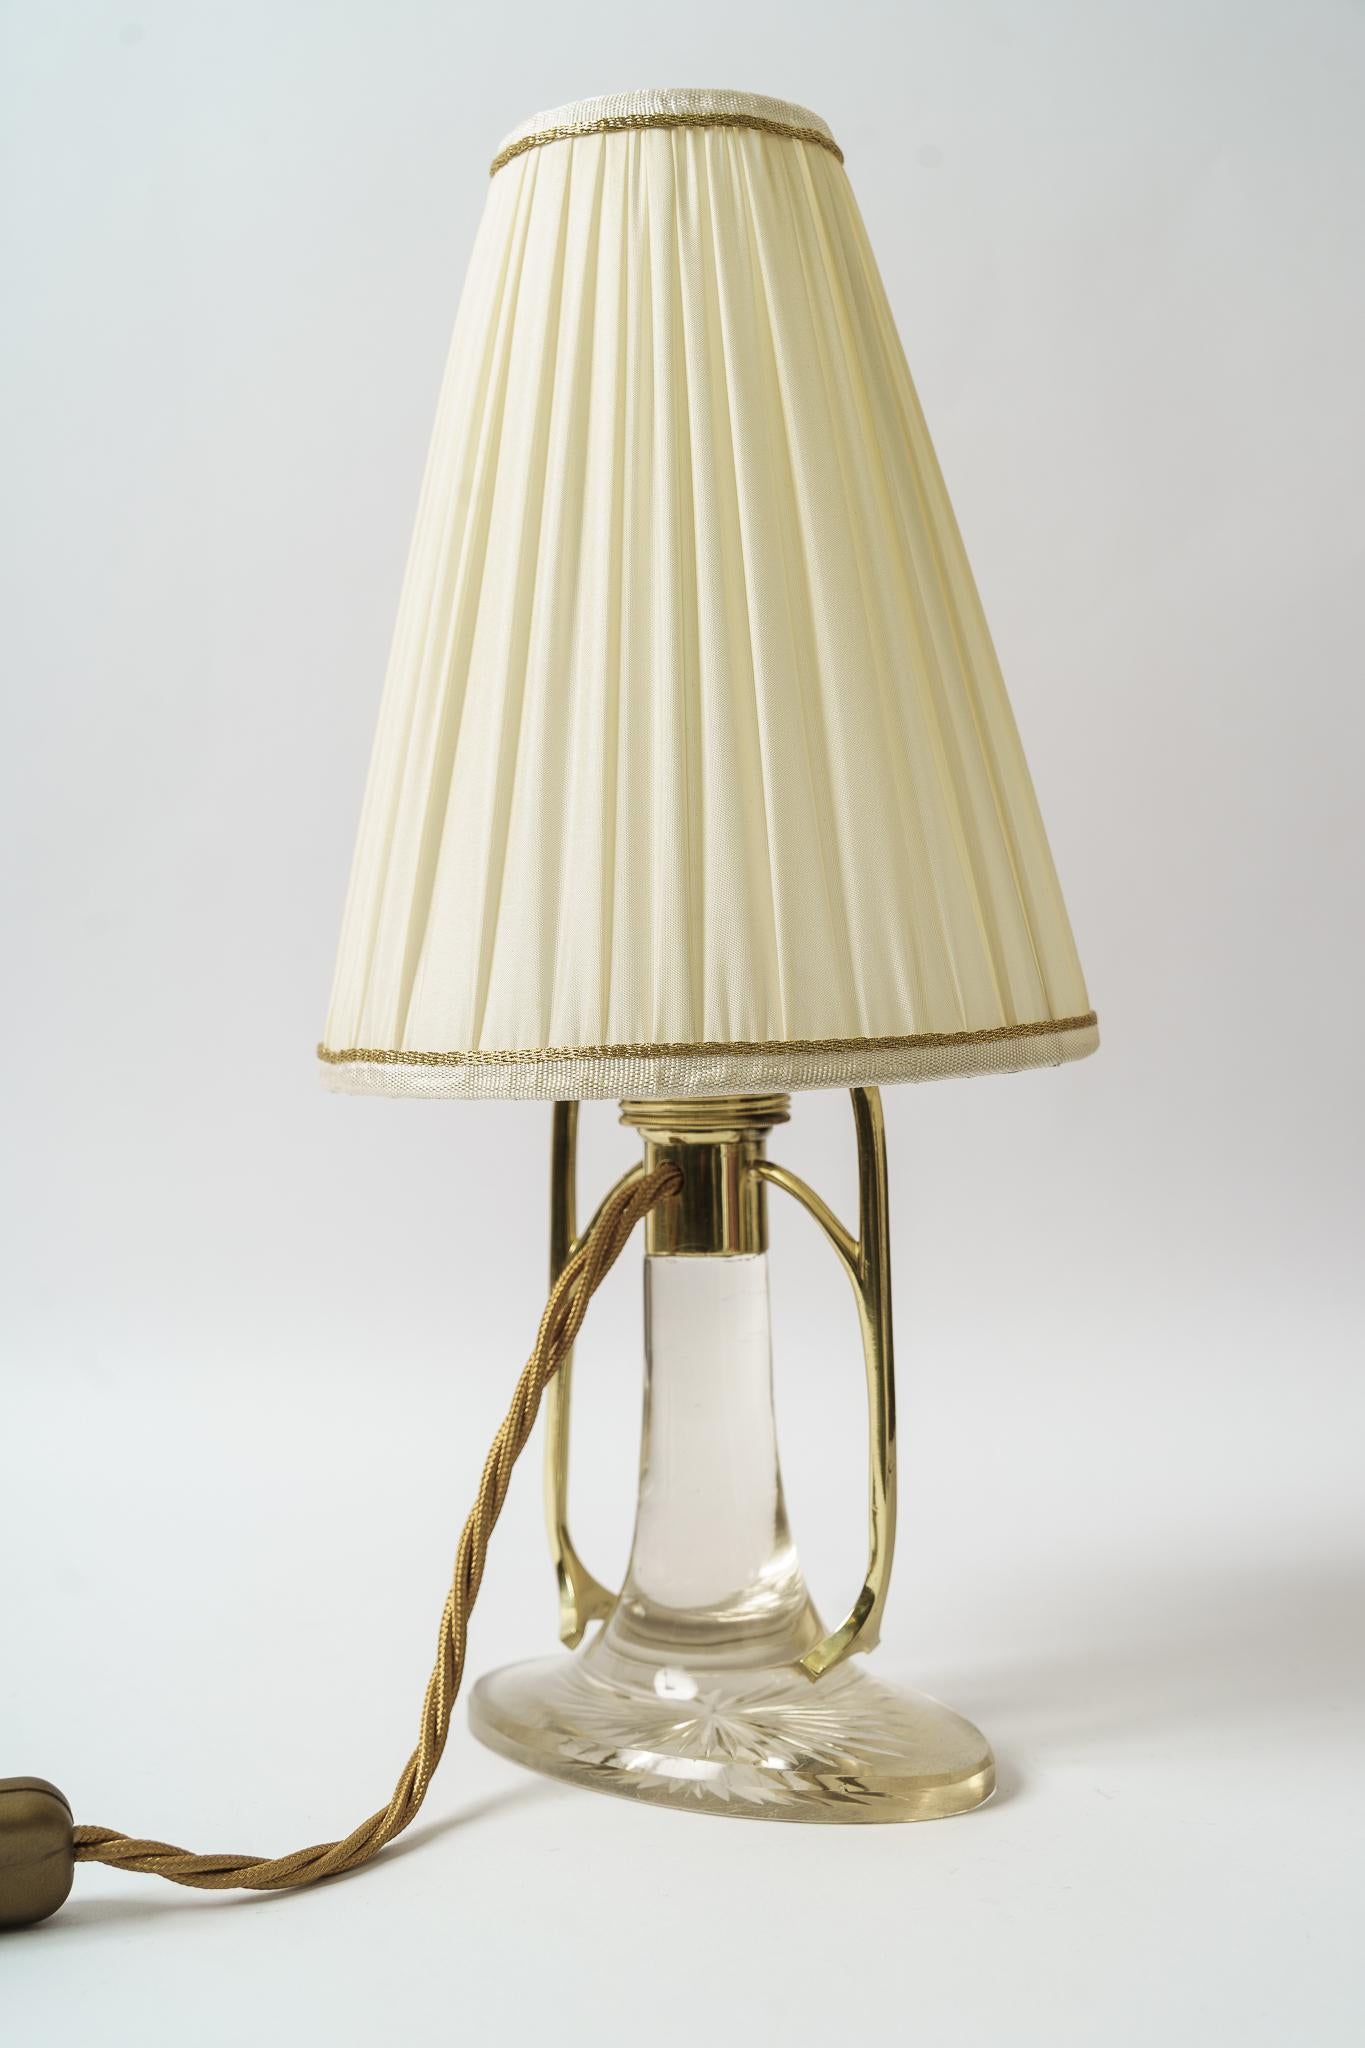 Rare Art Deco Glass Table Lamp with Fabric Shade Vienna Around 1920s For Sale 2